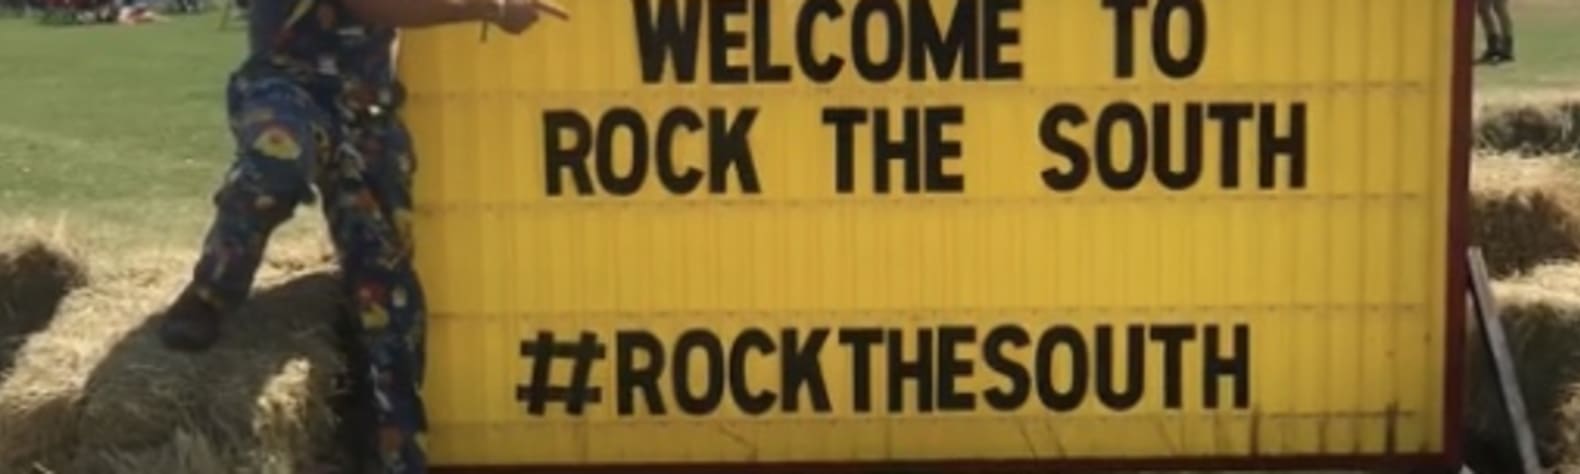 Rock the South Parking/Camping